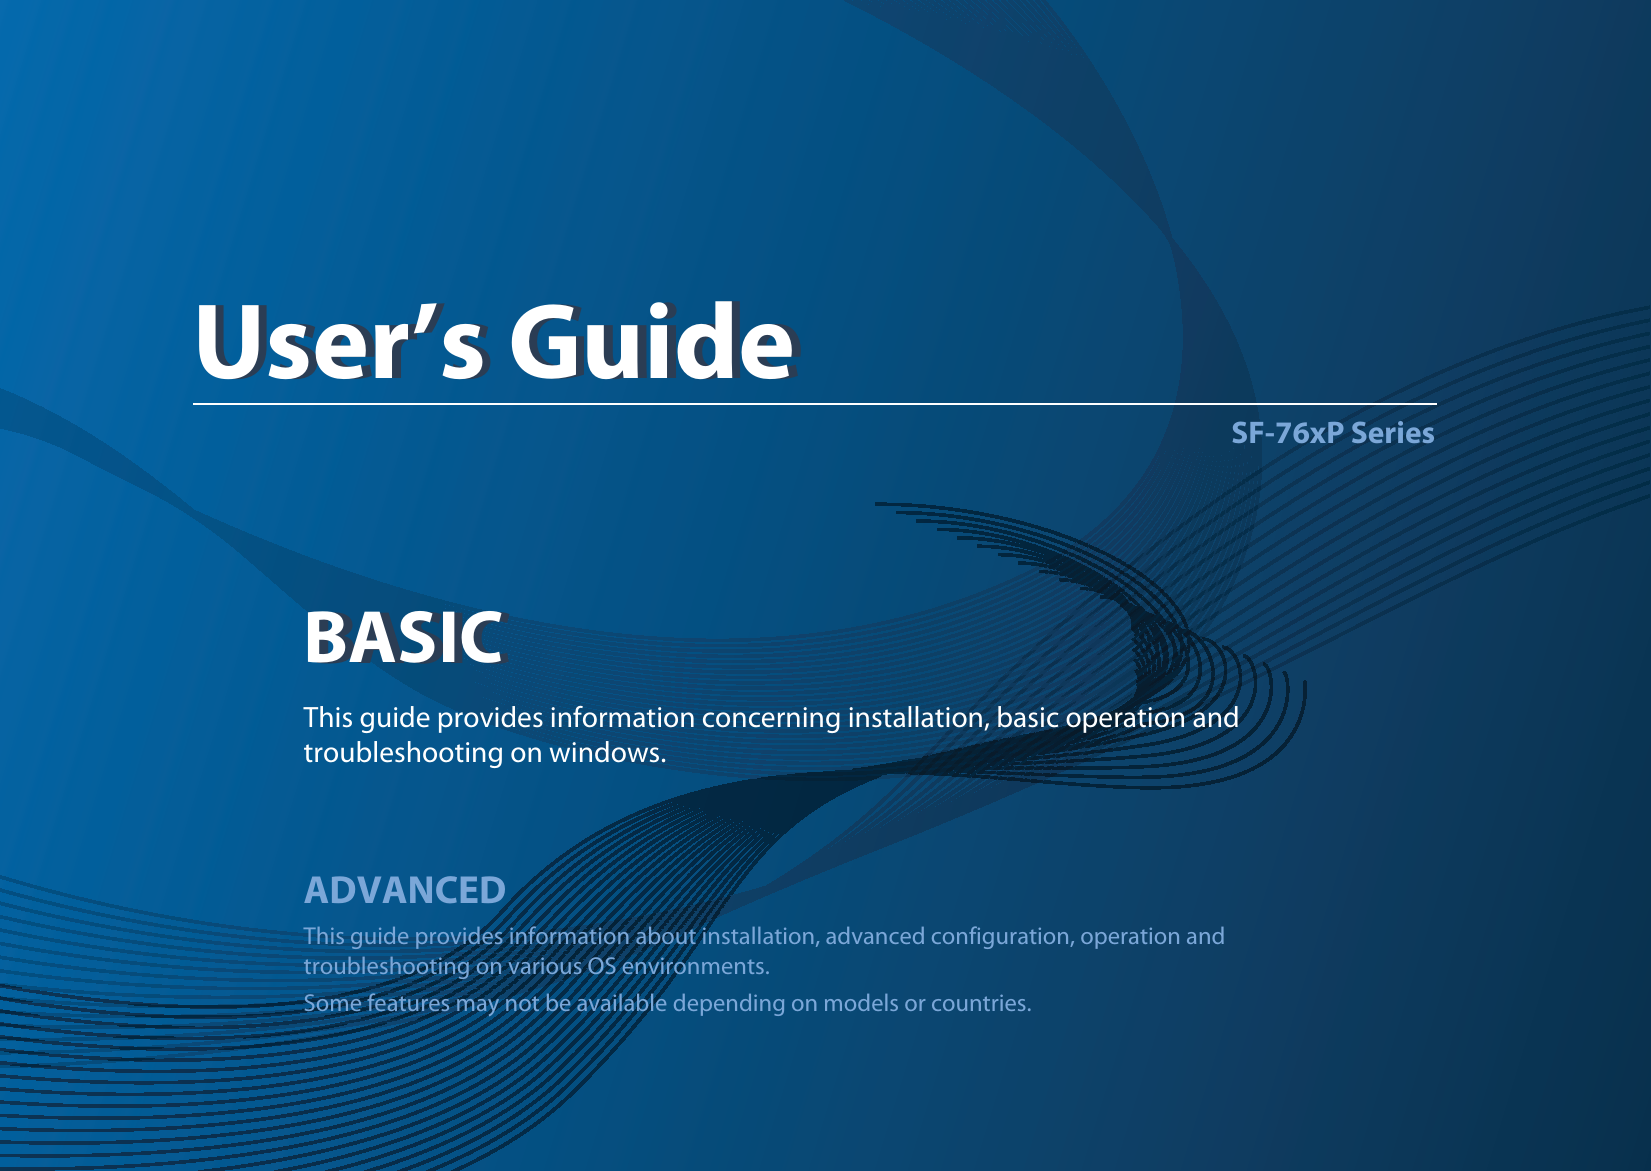 BASICUser’s GuideSF-76xP SeriesBASICUser’s GuideThis guide provides information concerning installation, basic operation and troubleshooting on windows.ADVANCEDThis guide provides information about installation, advanced configuration, operation and troubleshooting on various OS environments. Some features may not be available depending on models or countries.